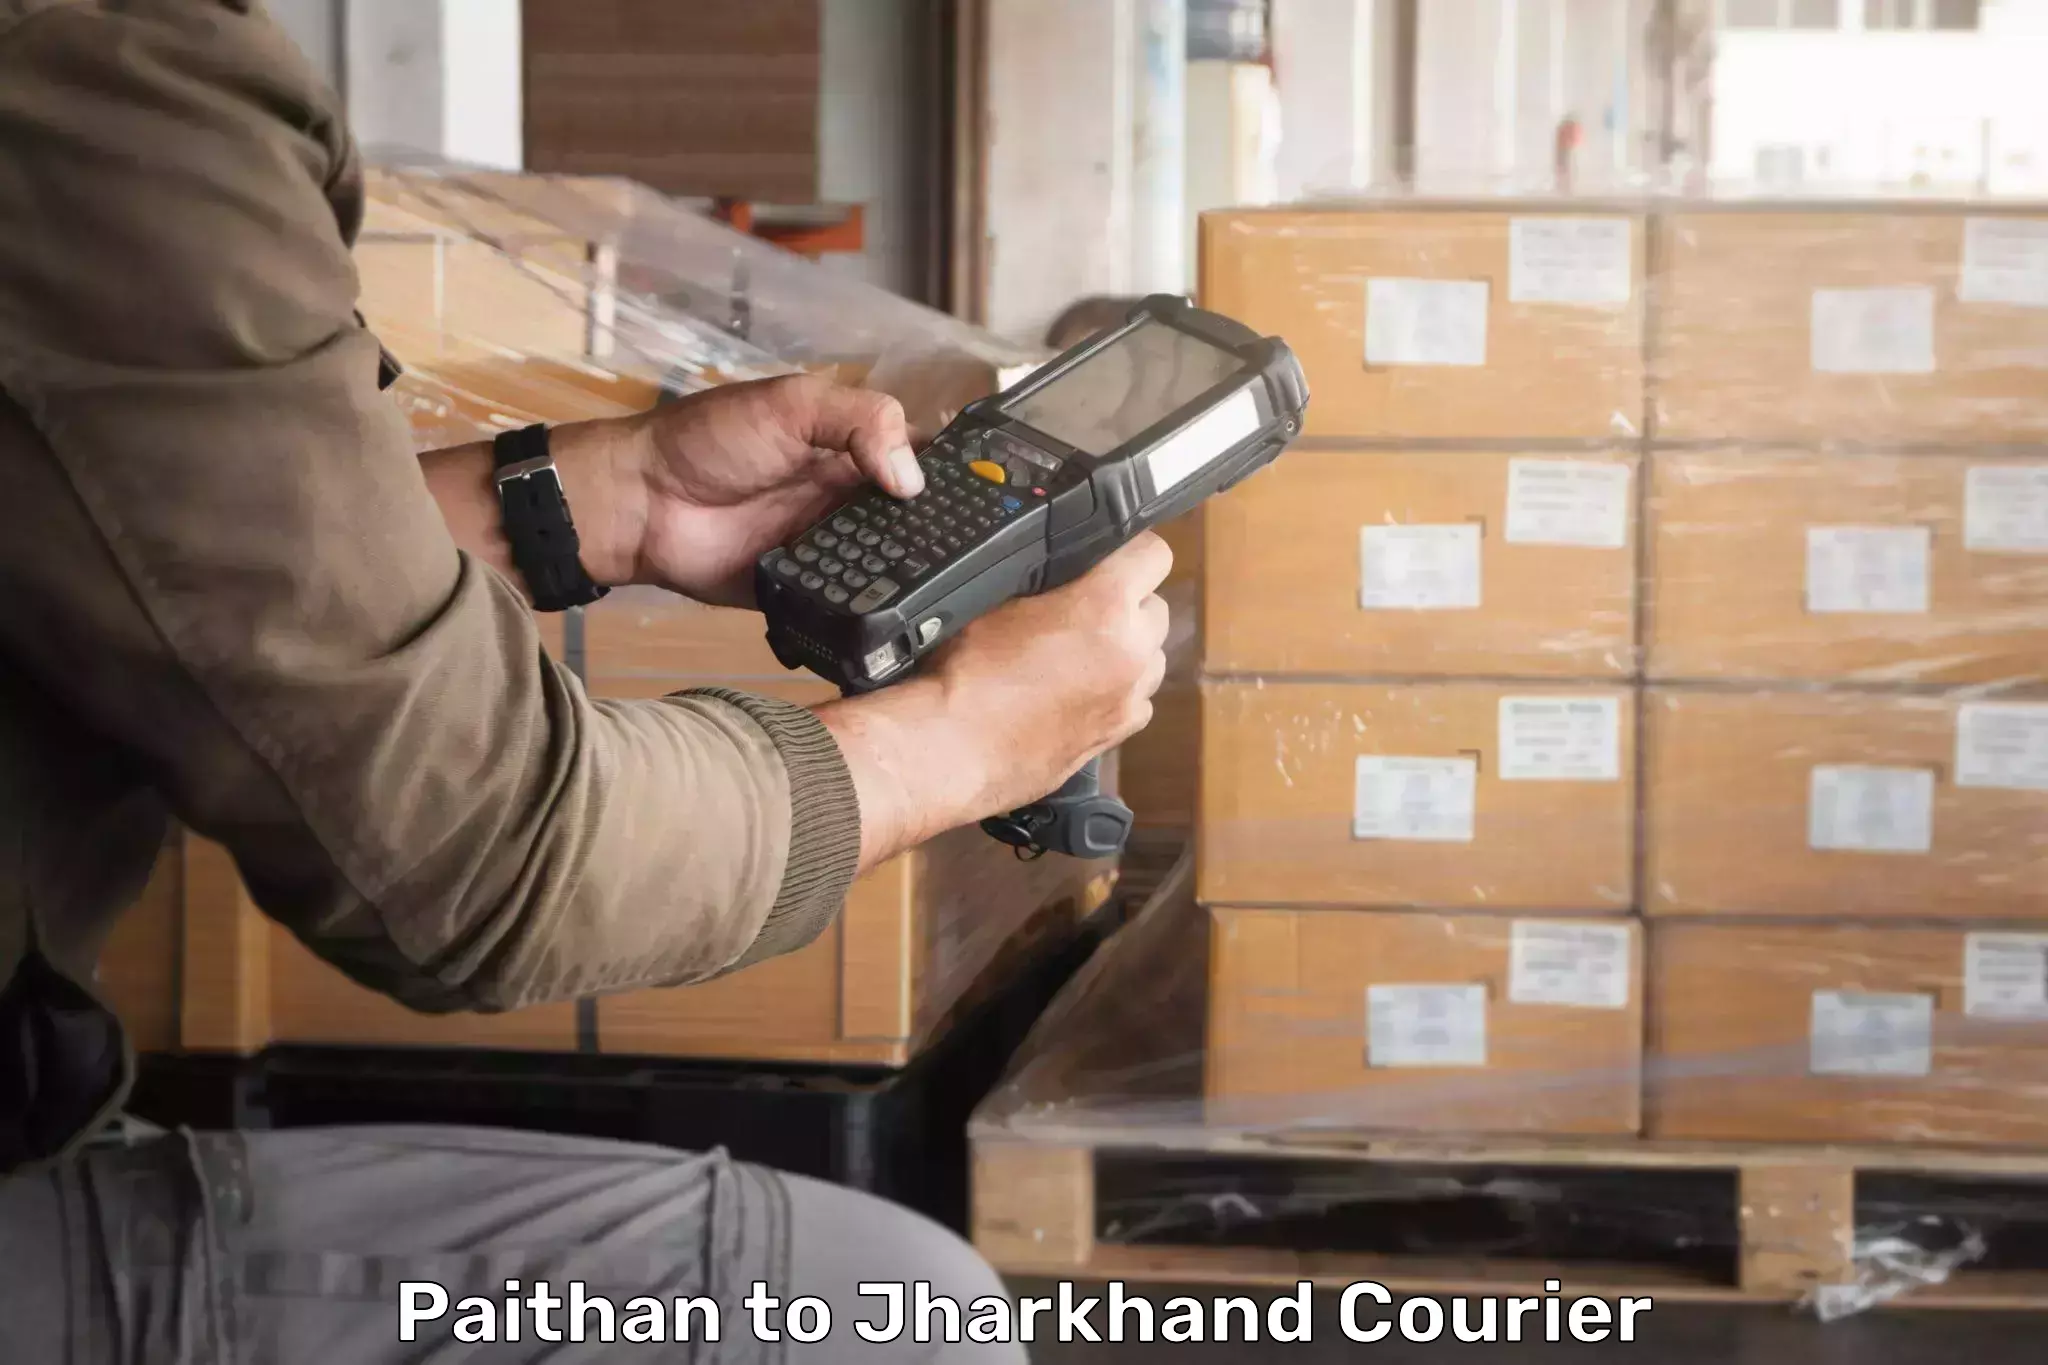 Sustainable shipping practices Paithan to Jharkhand